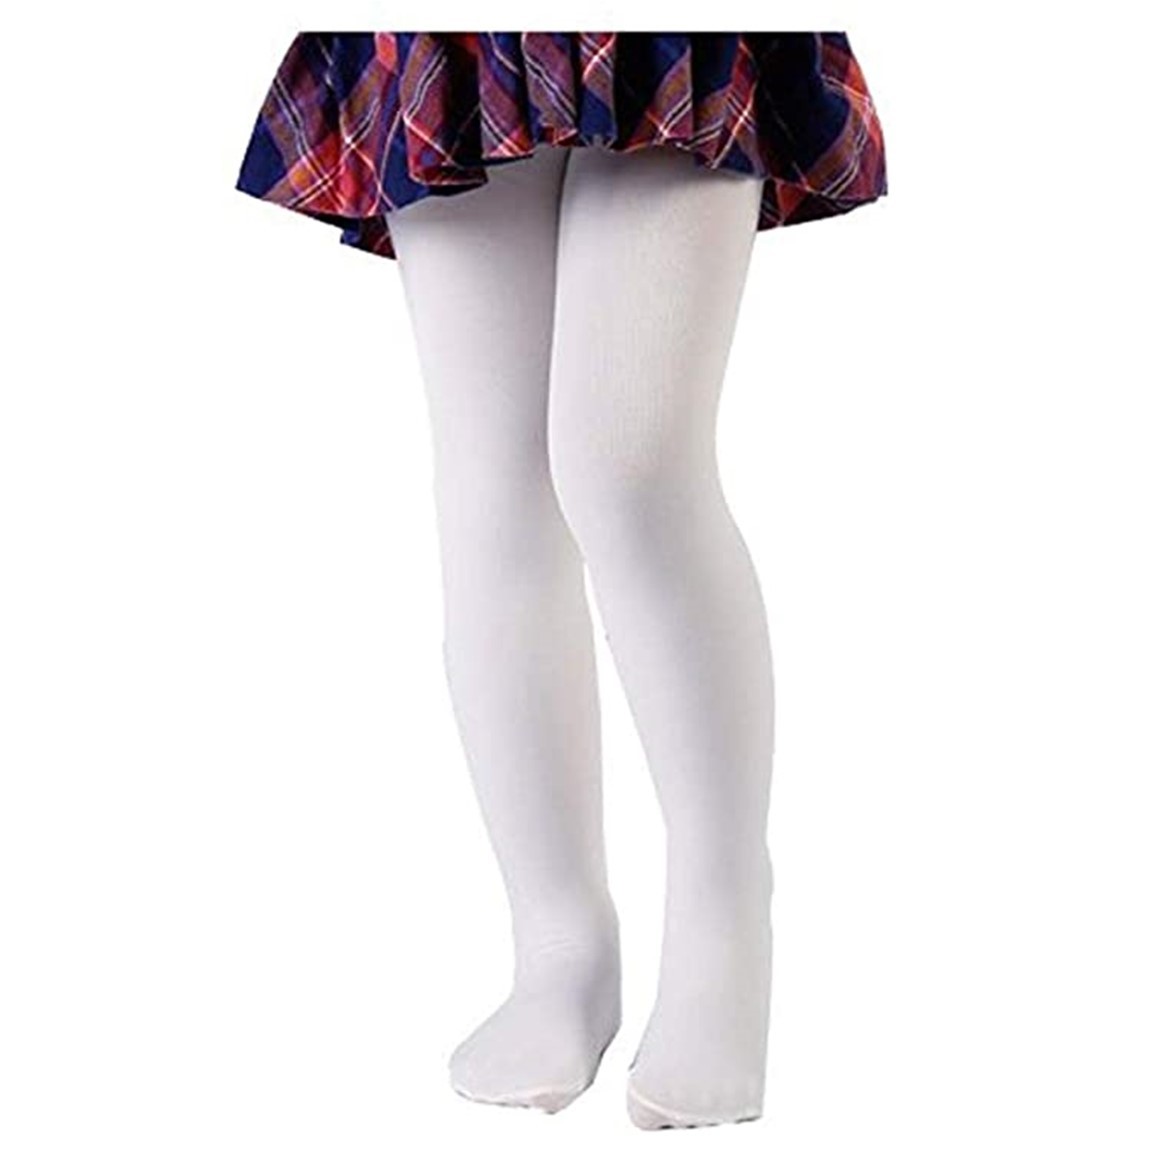 Girl's Heavy Knit Tights - White, Sizes S-XL